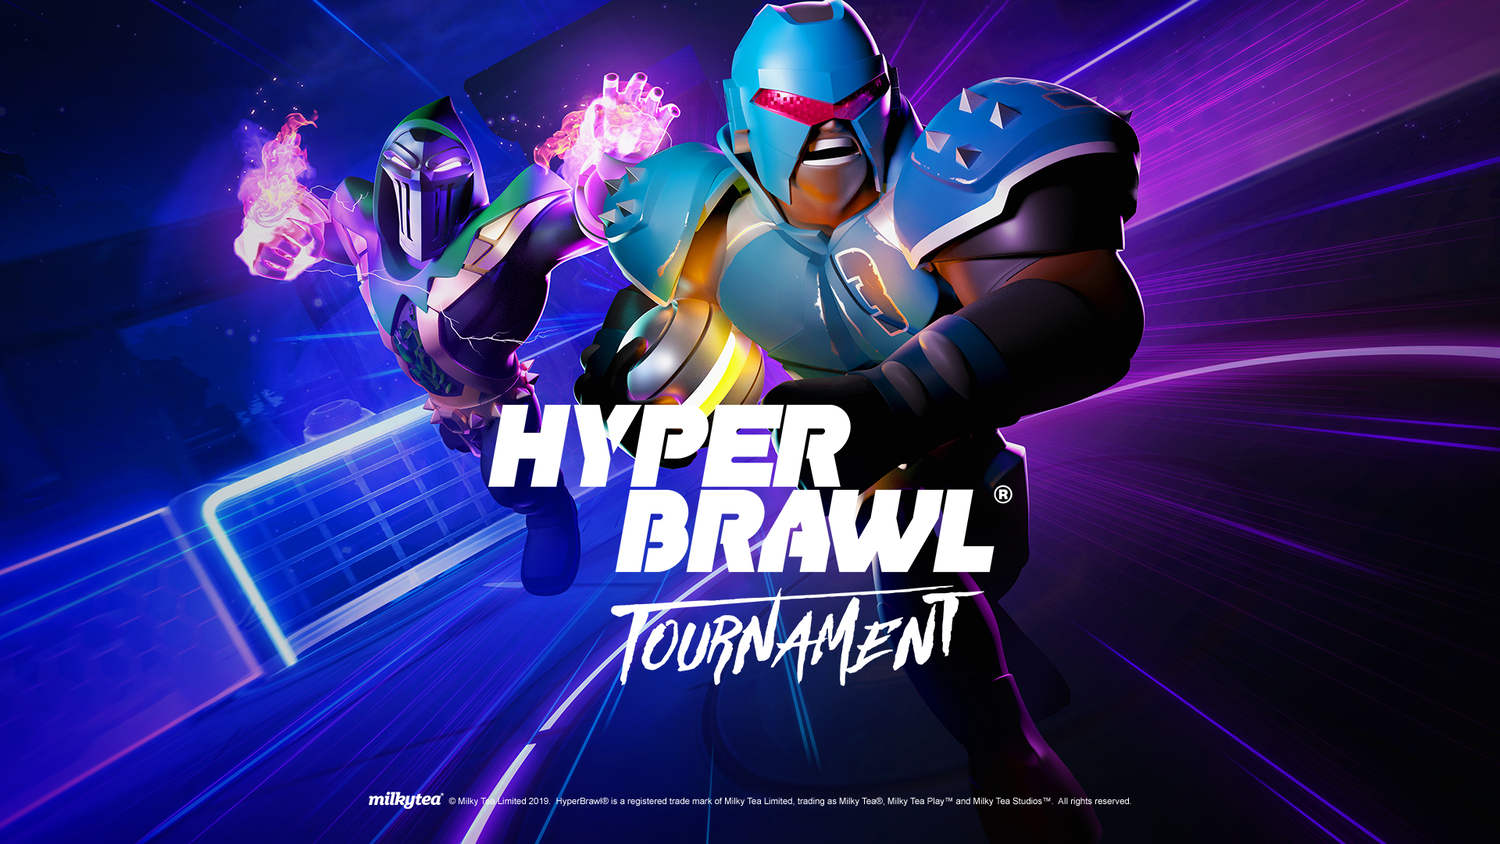 HyperBrawl Tournament (MUSIC FROM THE VIDEO GAME) soundtrack launching on October 16th from Sony/ATV and Sony Music Masterworks